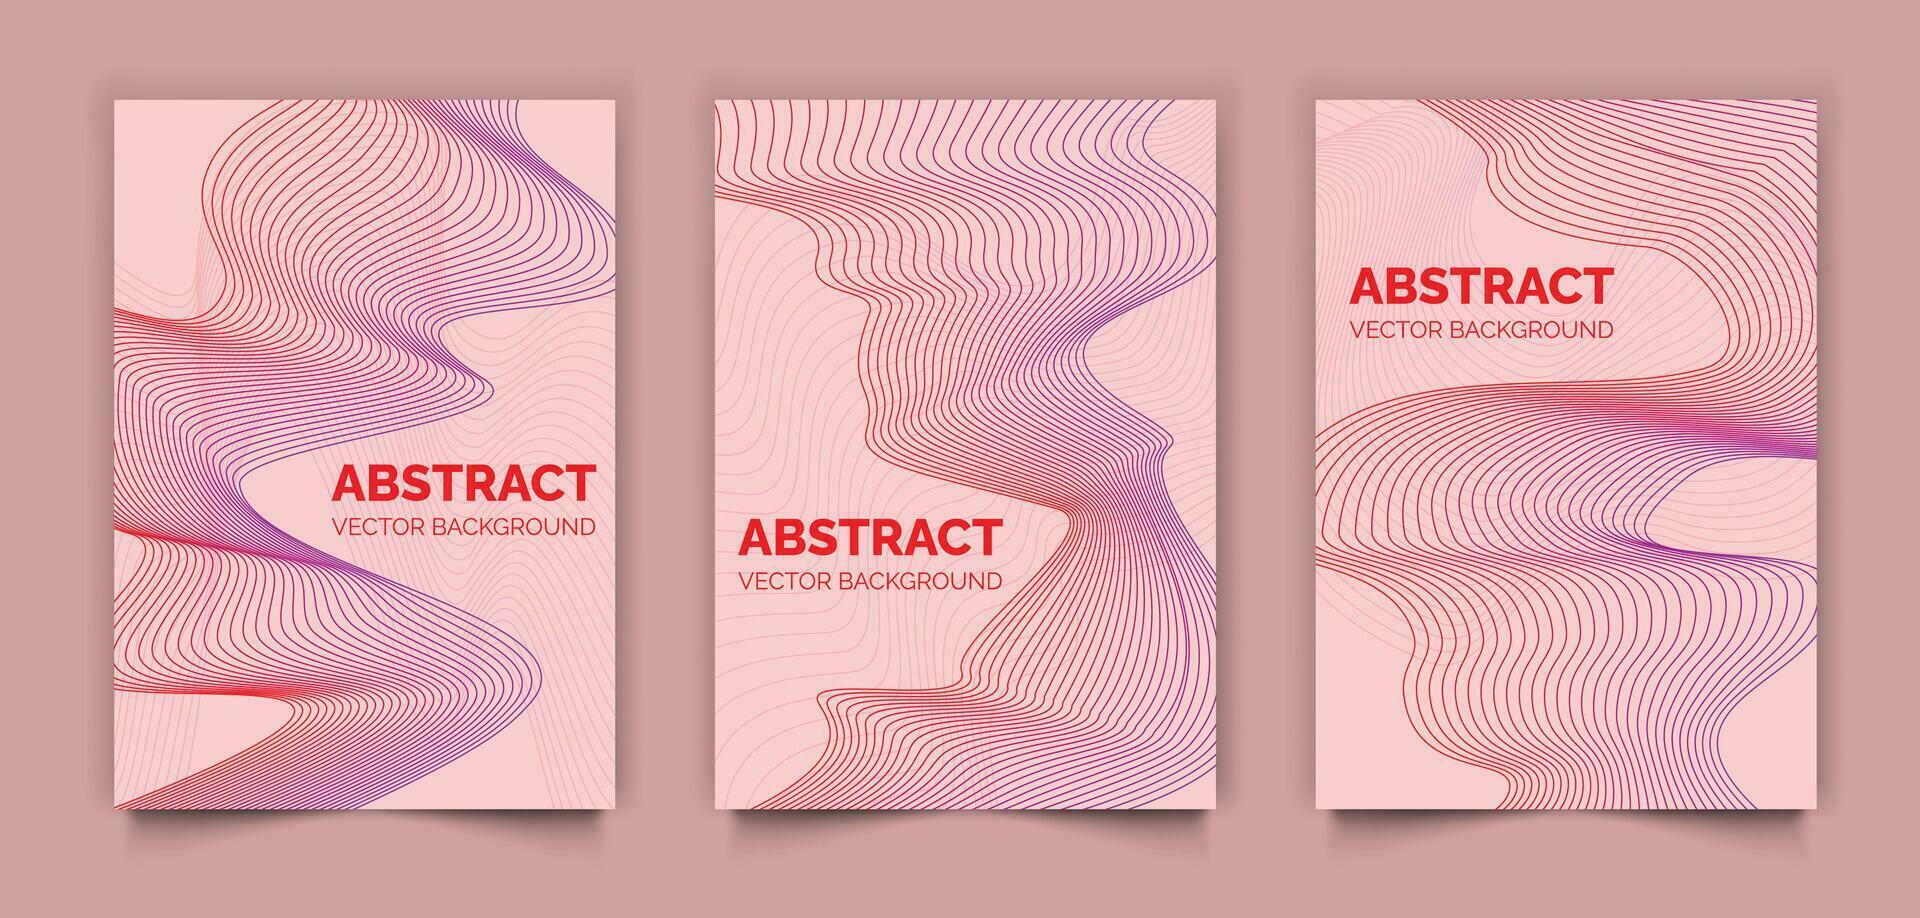 Set of abstract modern book covers design, red lines vector background, minimal template design for cover or web